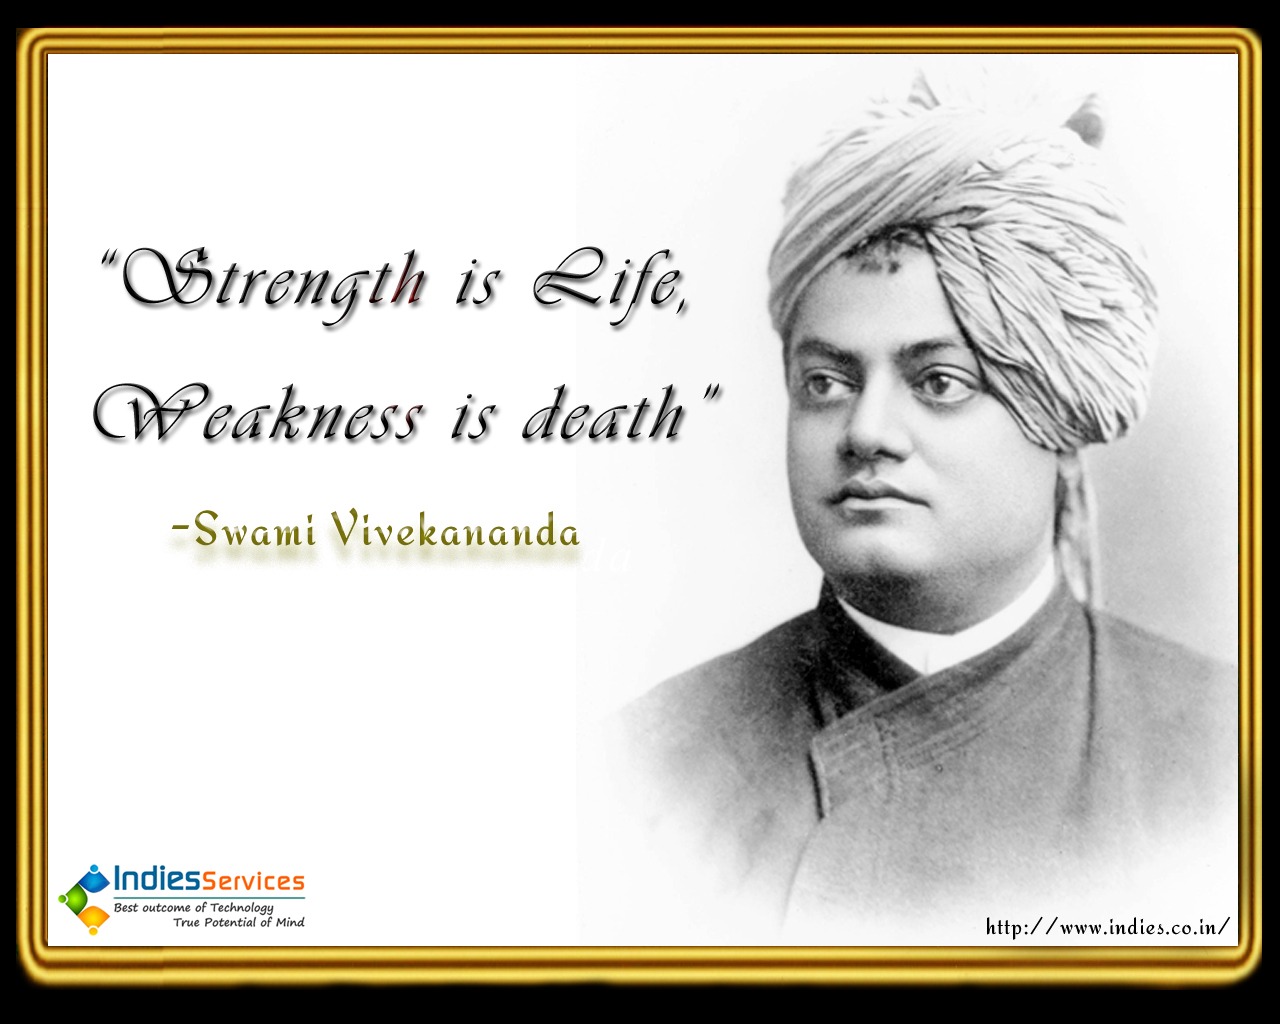 swami-vivekananda-wallpapers-with-quotes.jpg